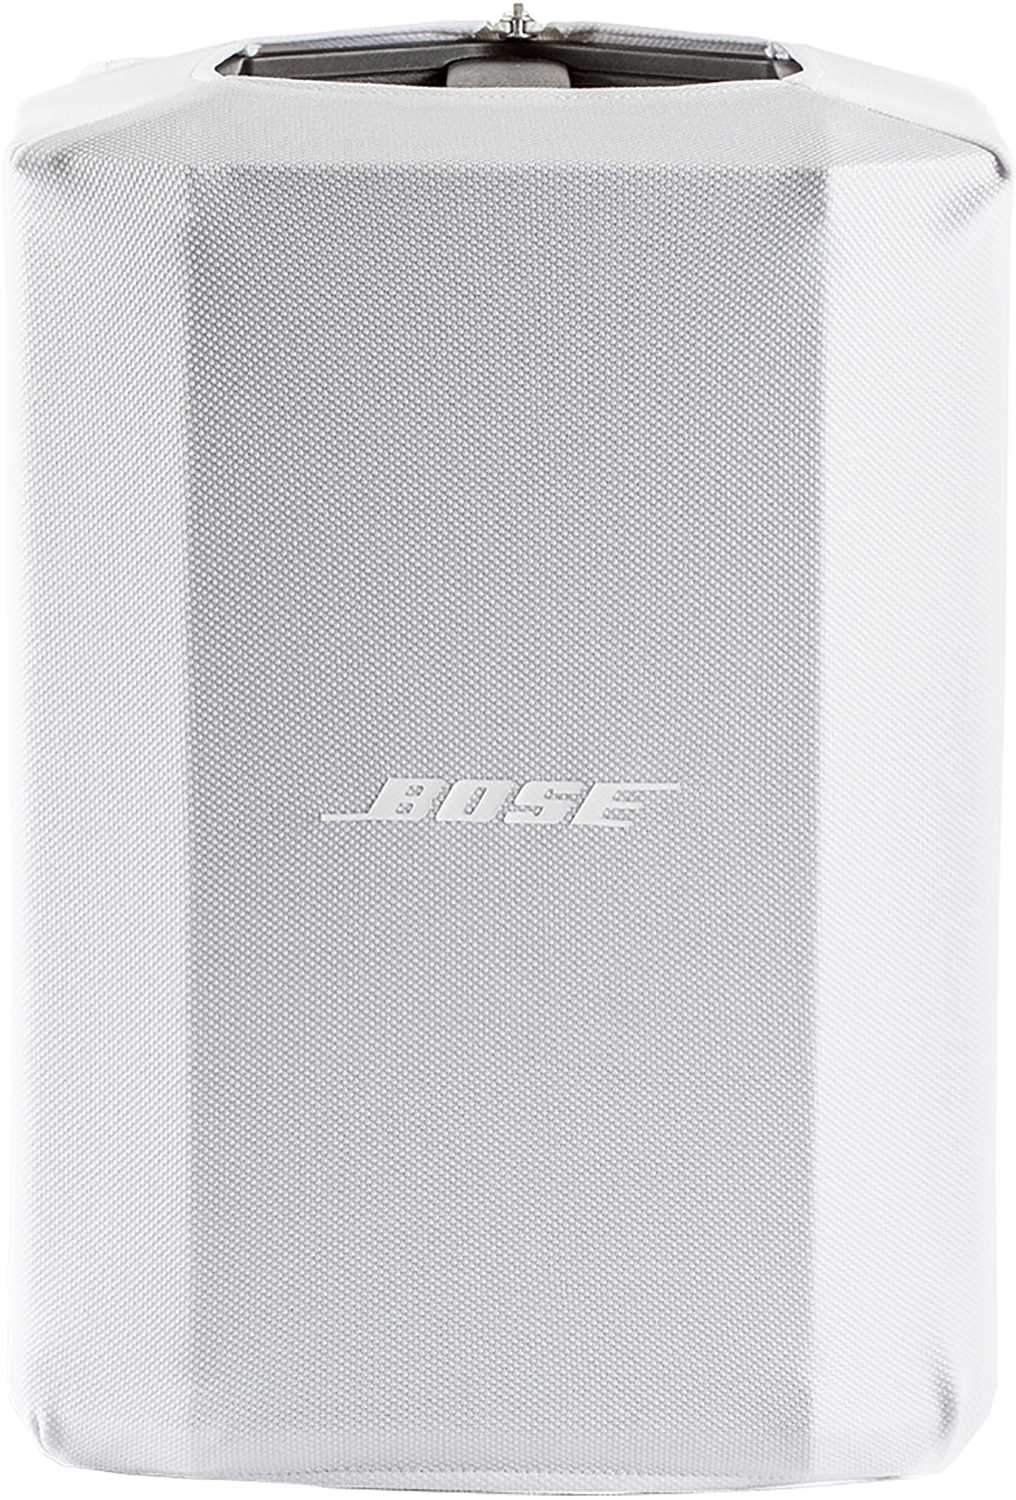 Bose S1 Pro Play-Through Cover - Nue Artic White - PSSL ProSound and Stage Lighting